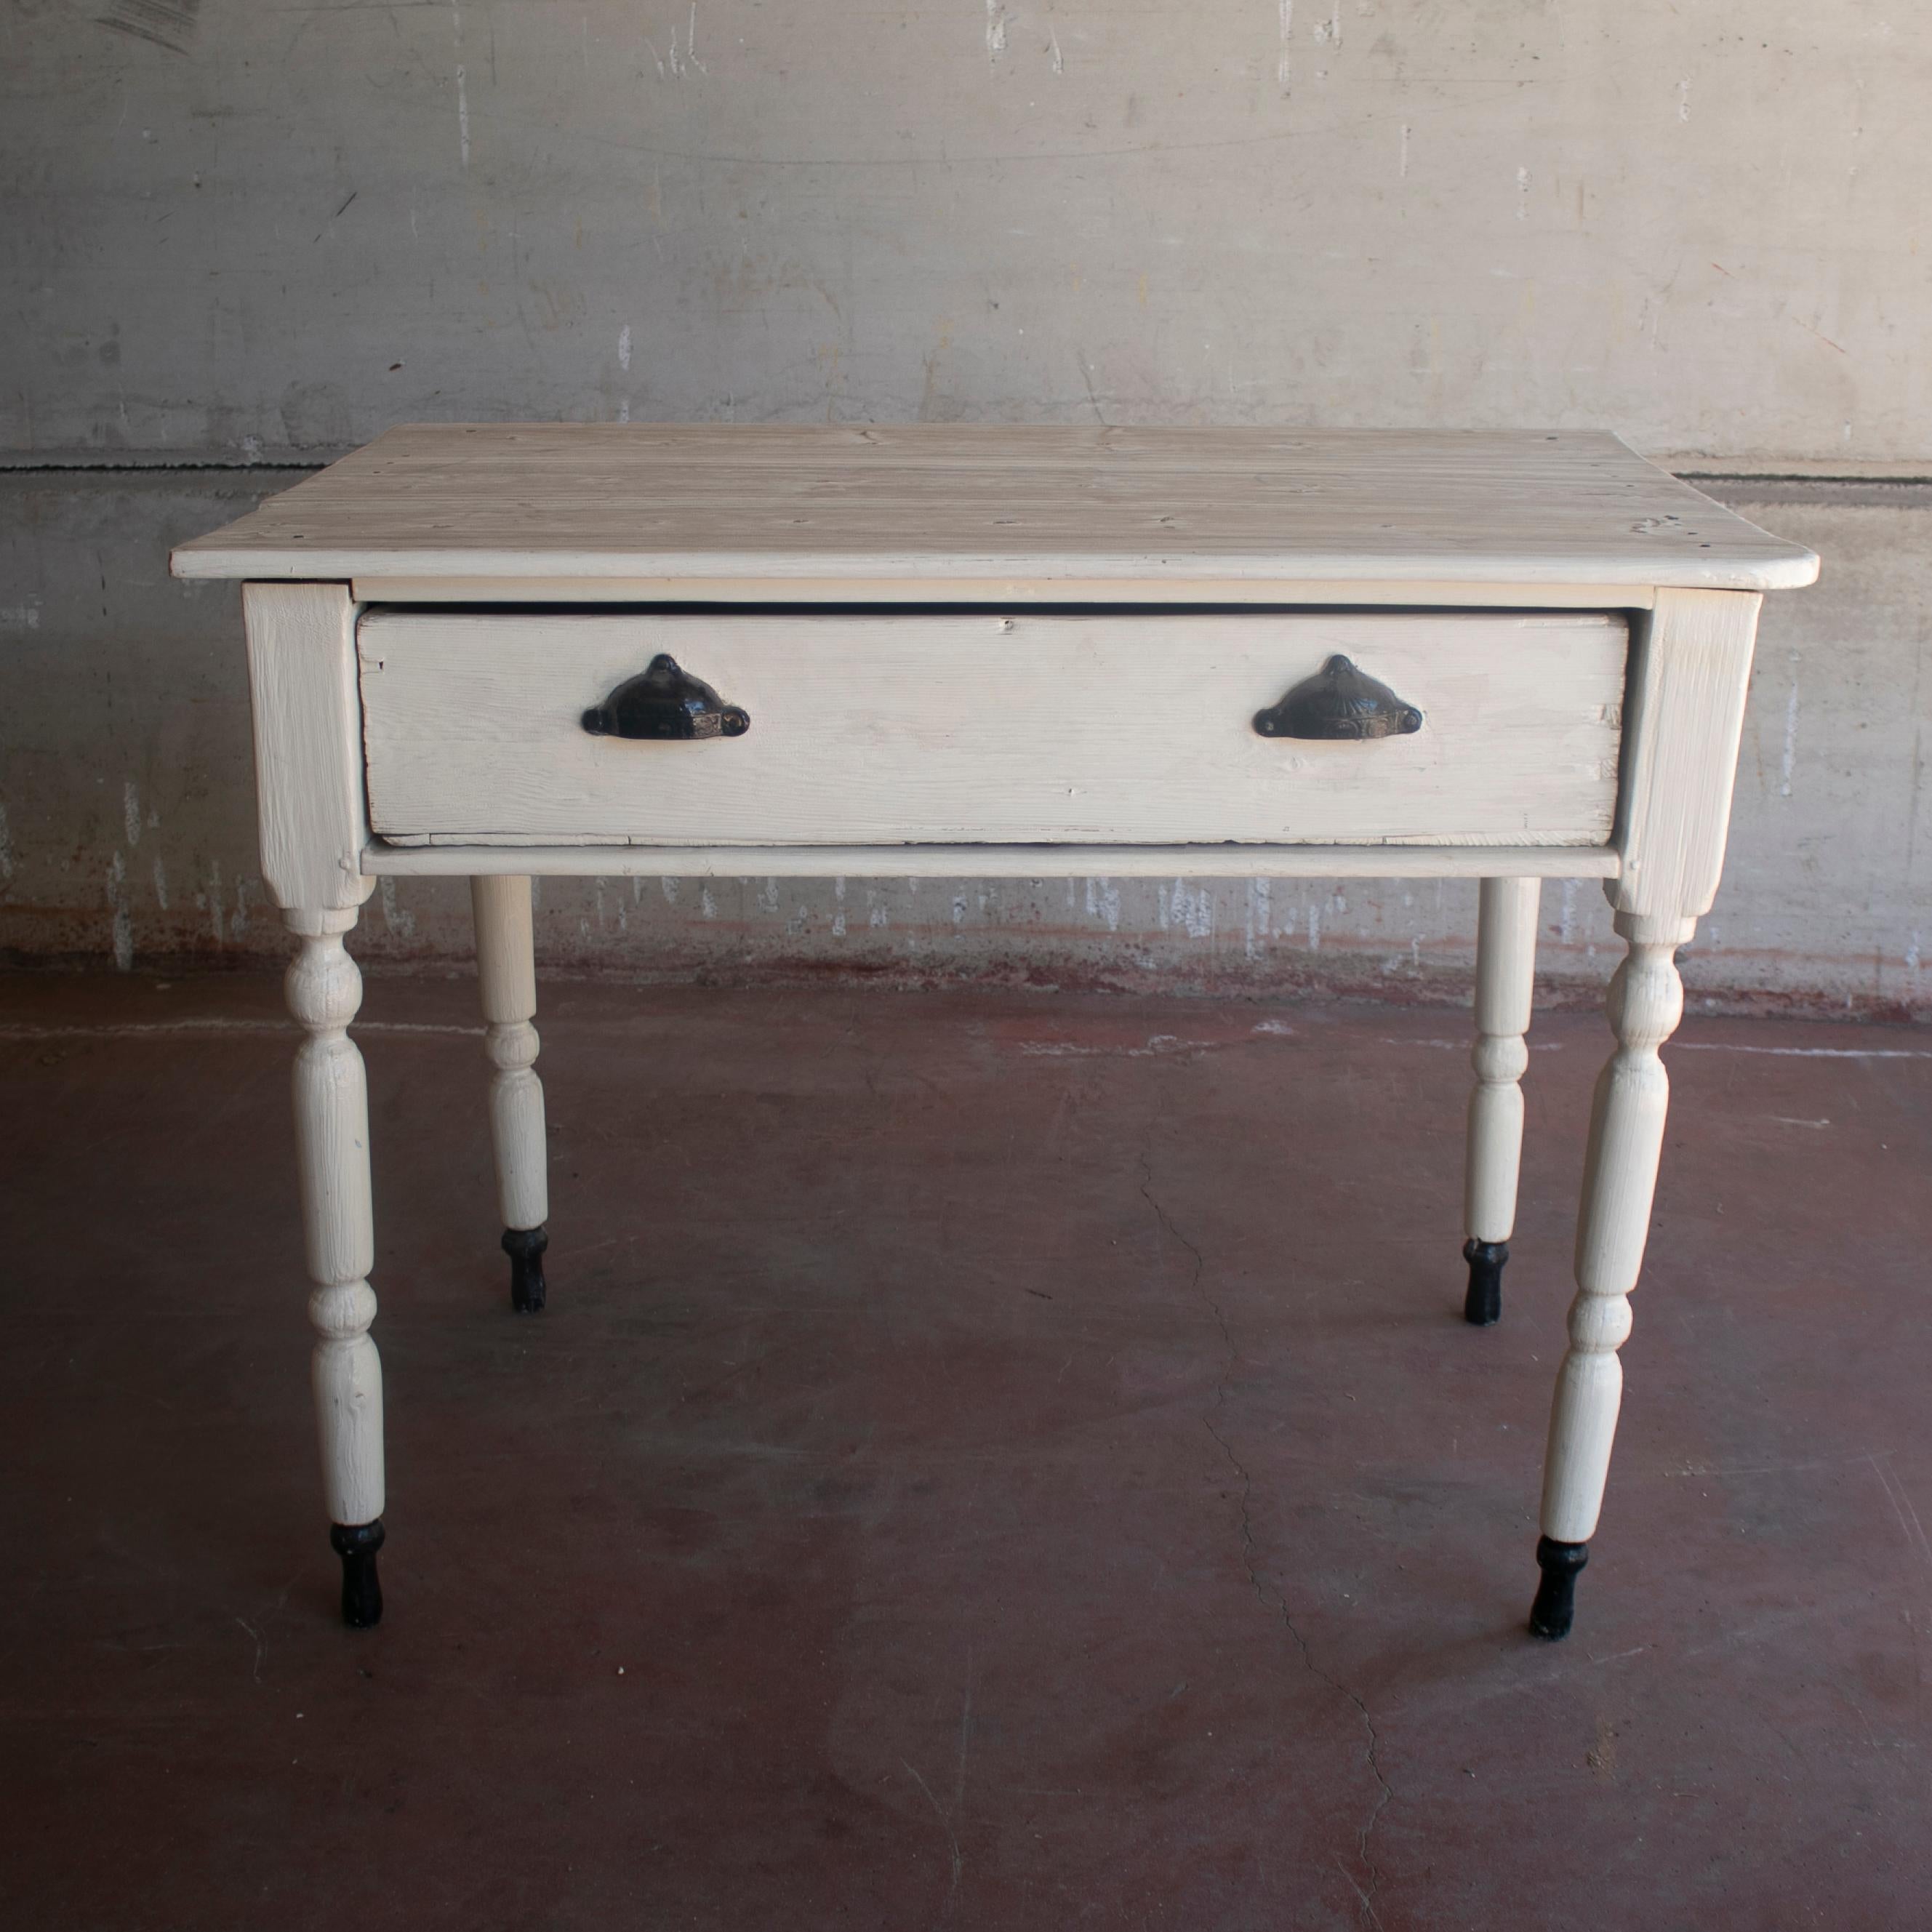 1920s Spanish one drawer farmhouse wooden table painted white.